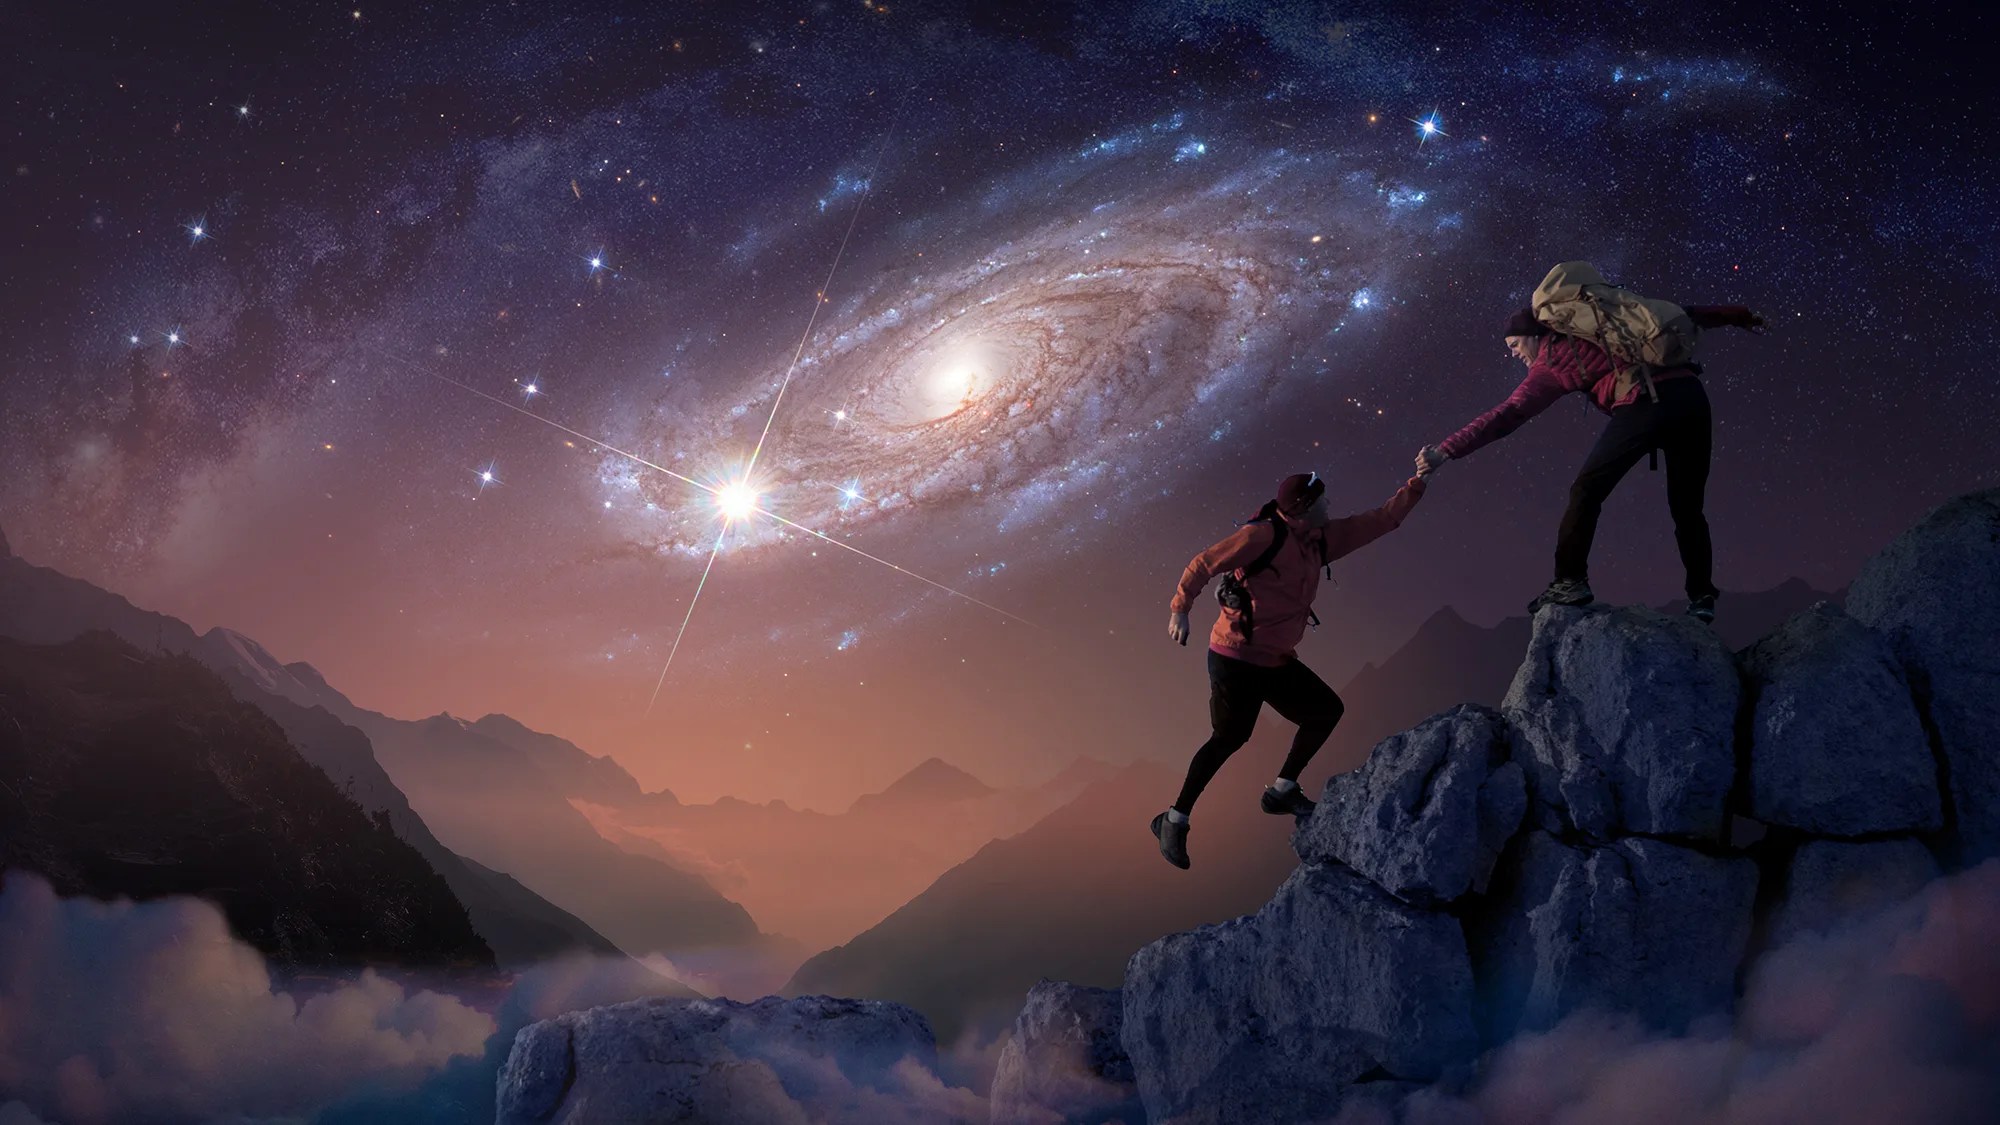 artist concept of two silhouetted people climbing a mountain with a starry sky and galaxy in the background